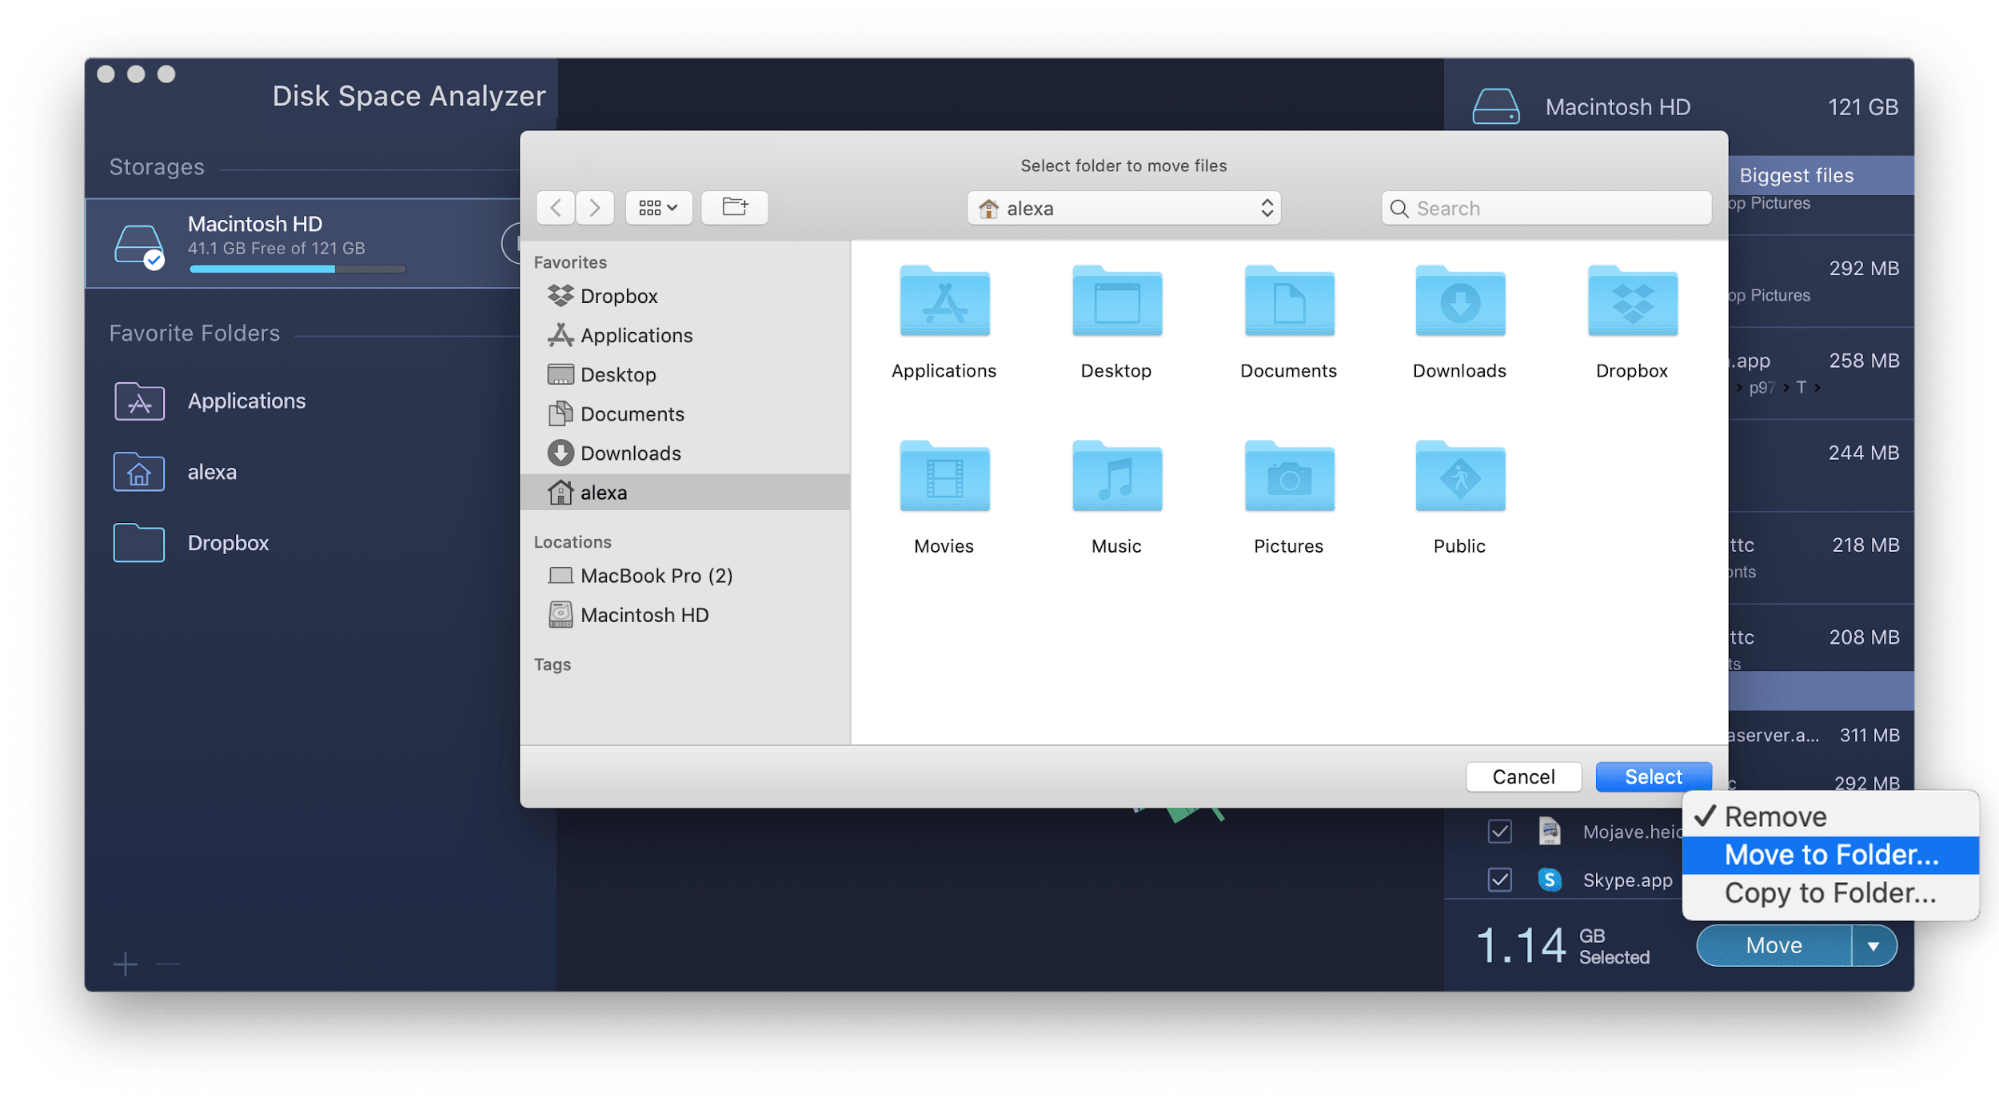 removing or moving big files with Disk Space Analyzer